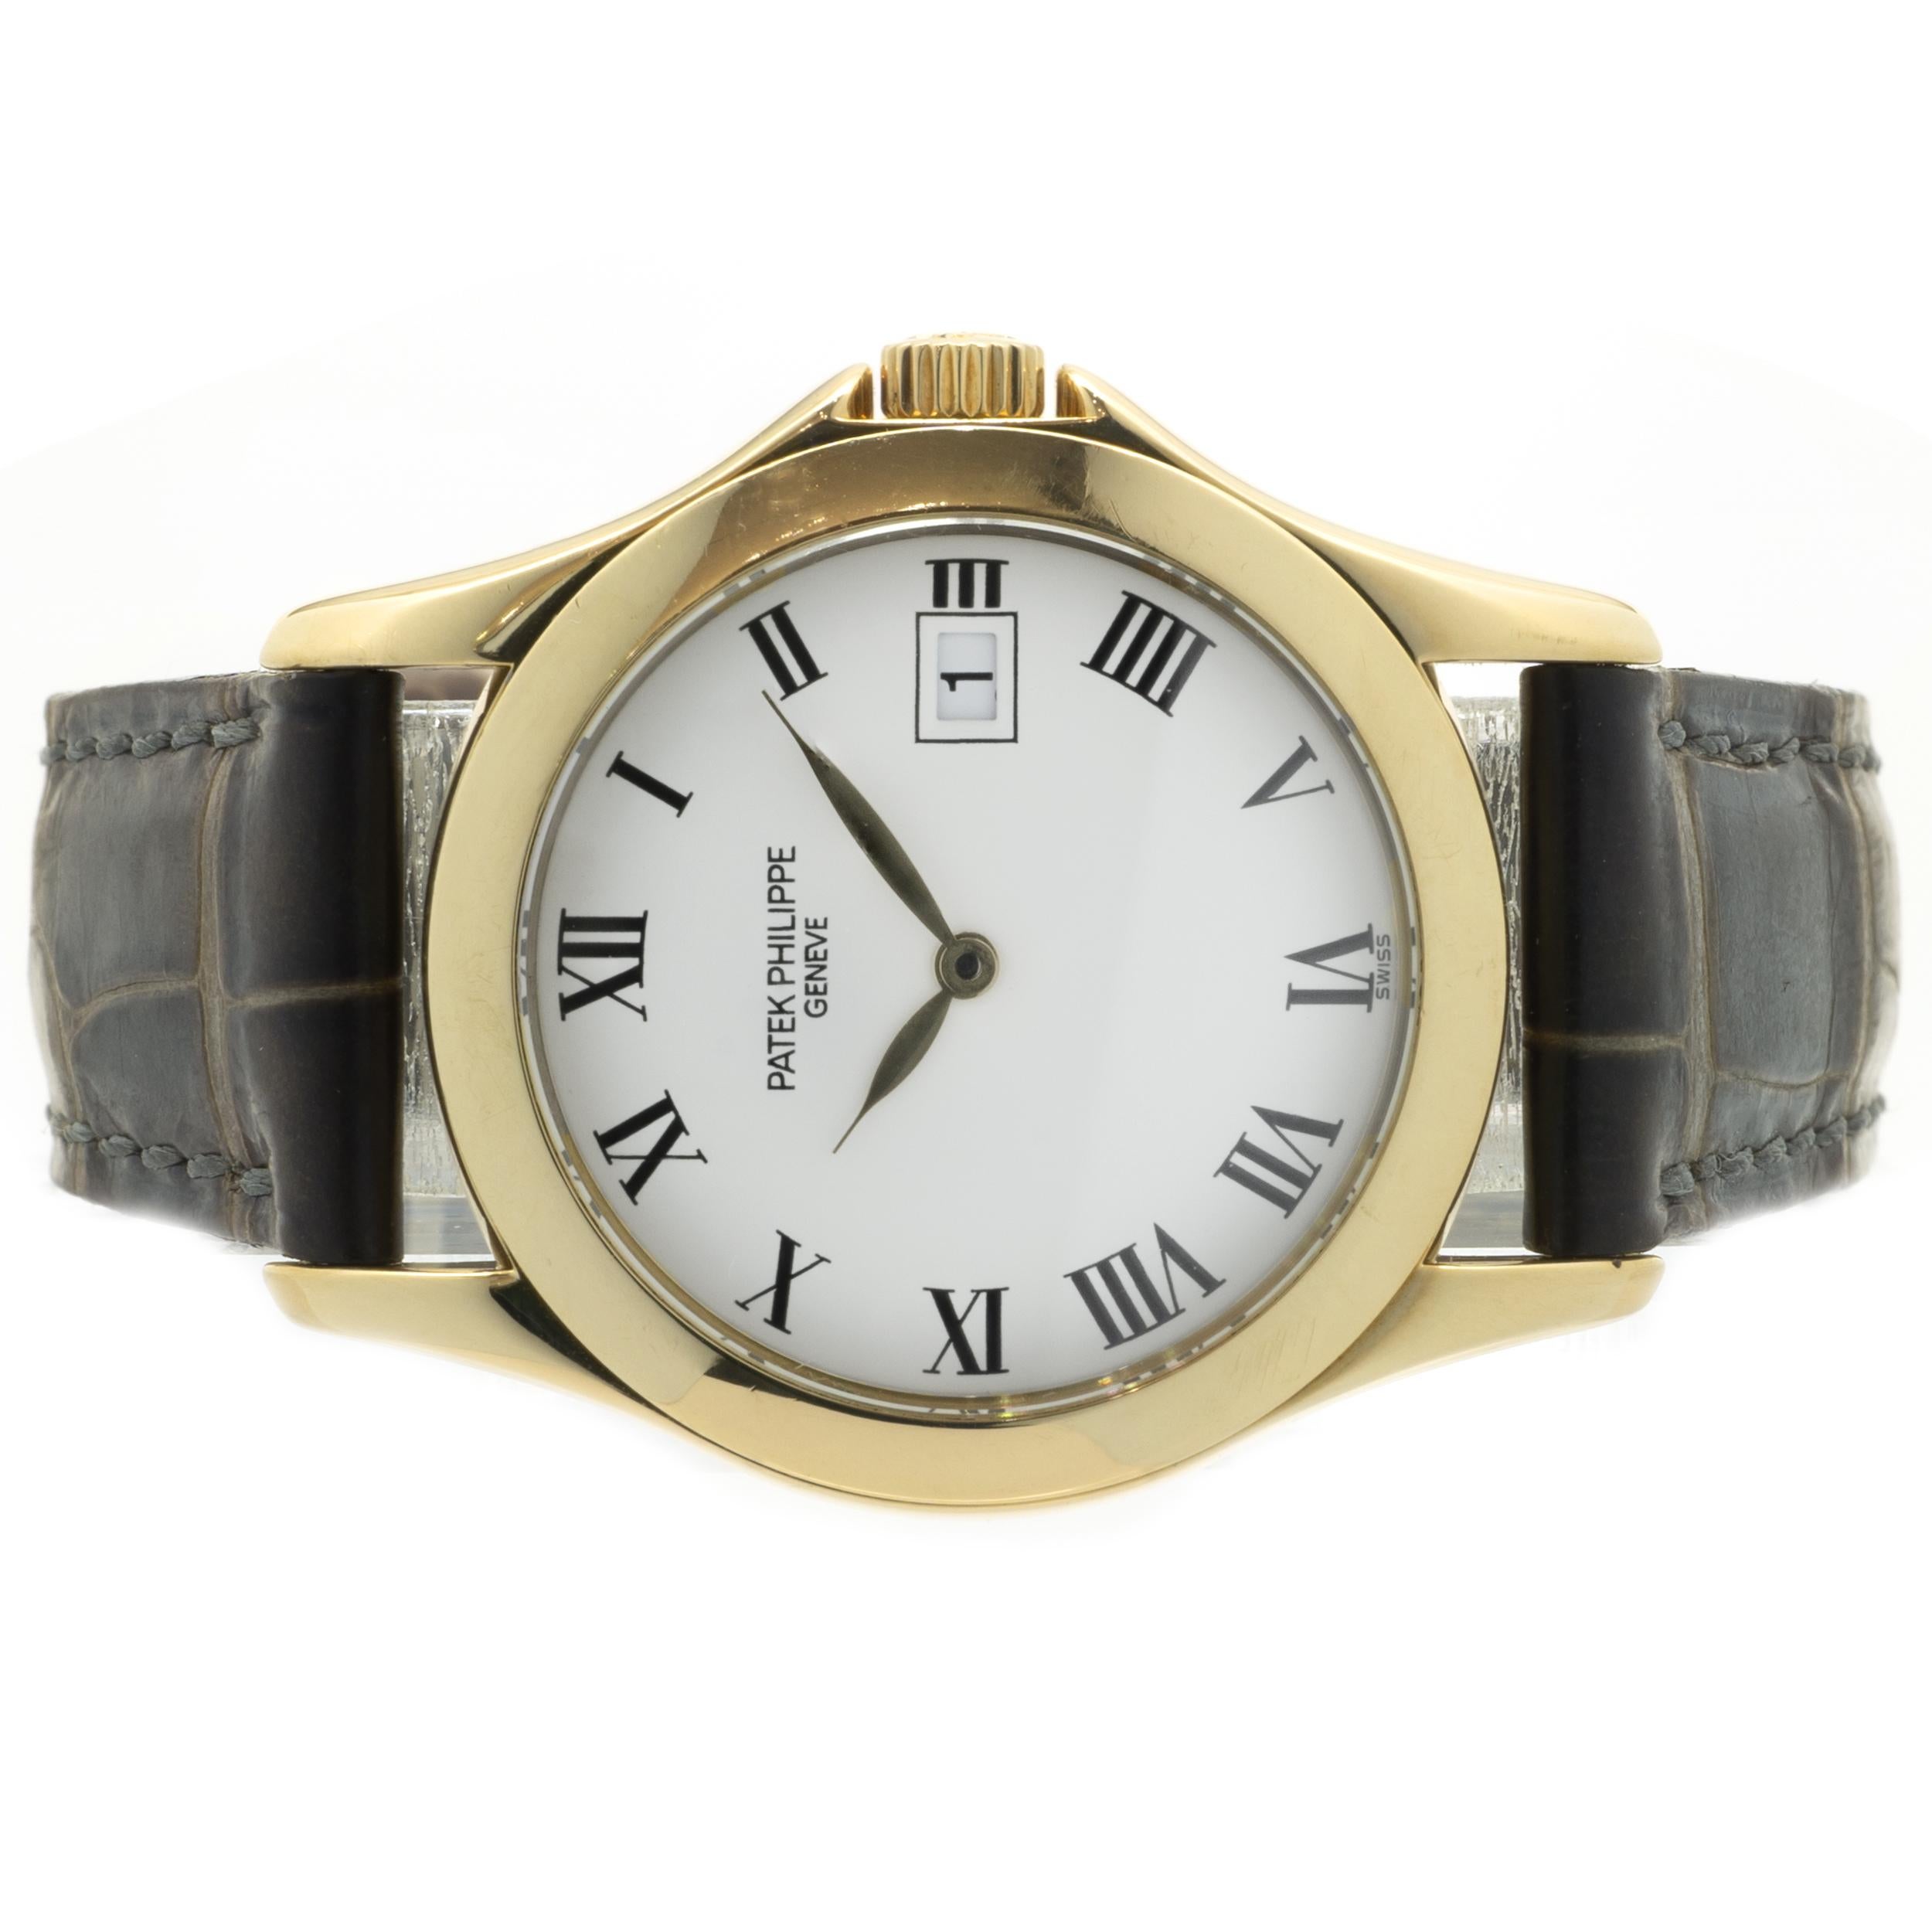 Movement: automatic
Function: hours, minutes, date
Case: 28mm 18K yellow gold round case, sapphire crystal
Dial: white roman dial, gold hands
Band: Patek Philippe brown leather strap with buckle
Reference #: 4906
Serial #: 4133XXX /